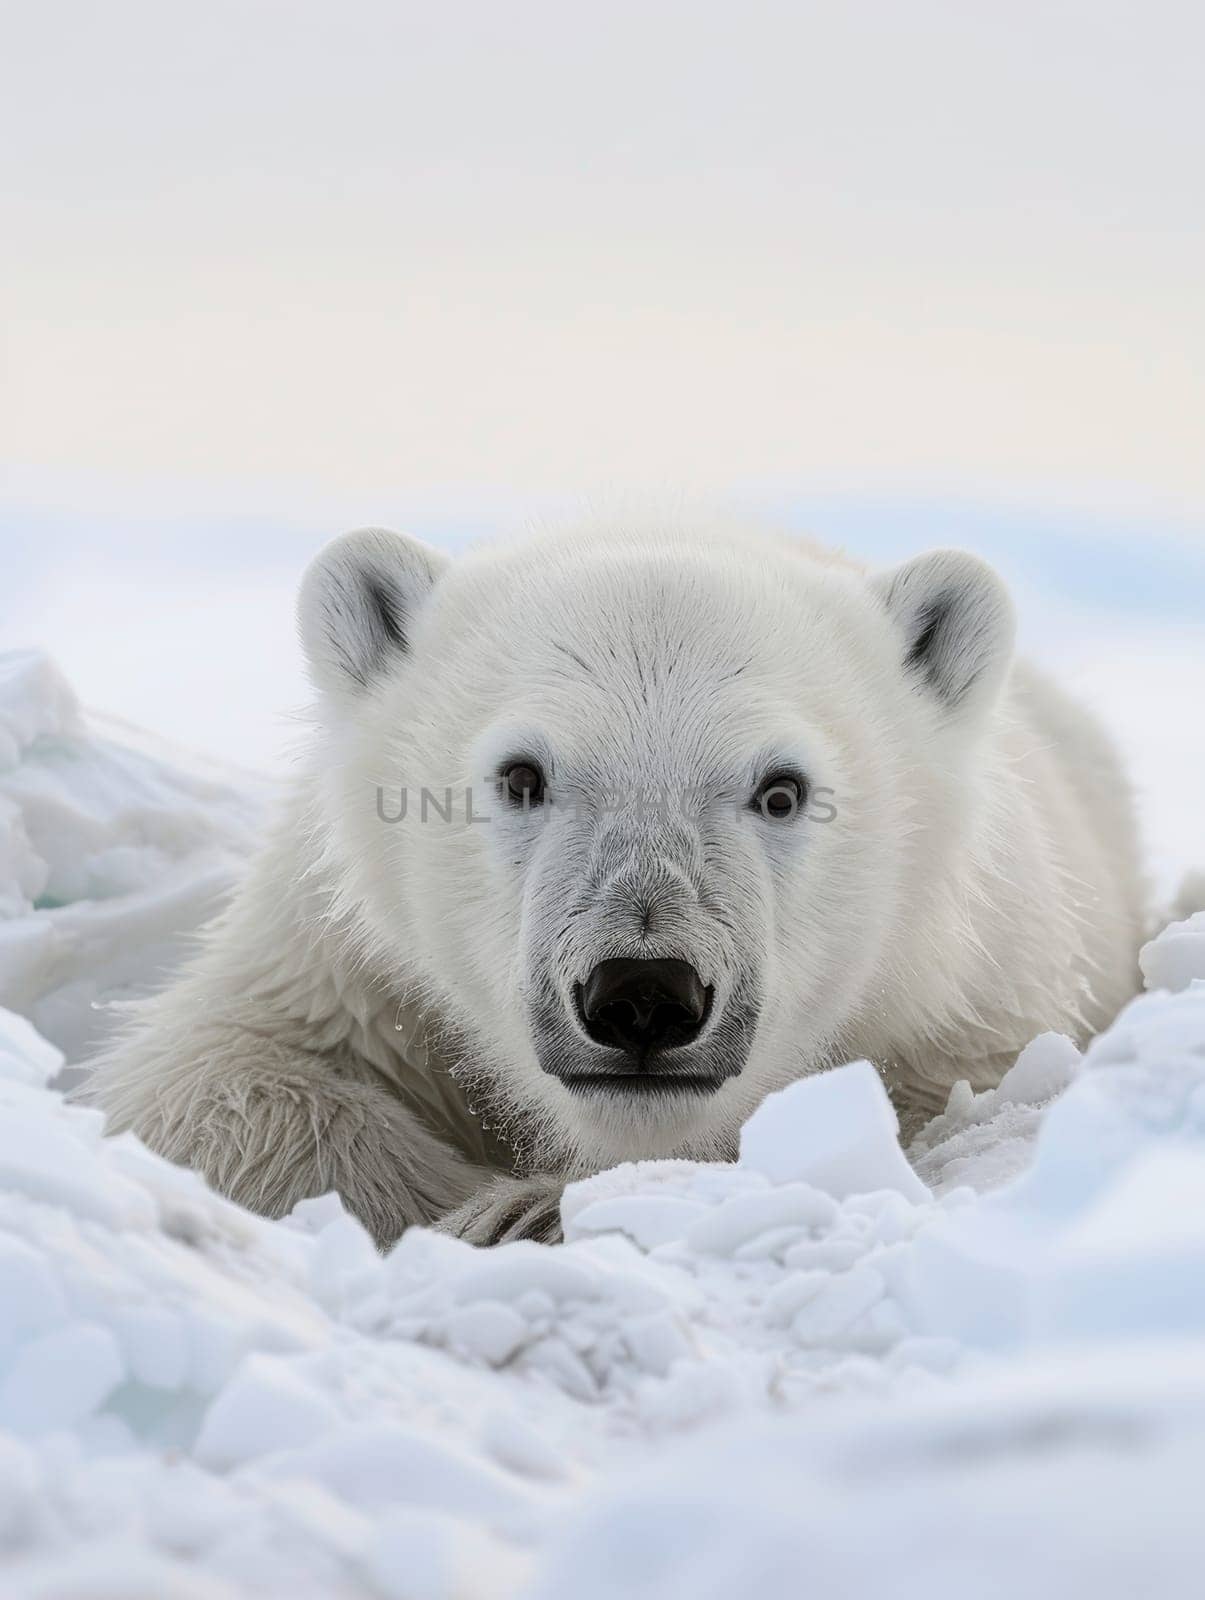 A polar bear peers curiously at the camera, nestled in the frosty embrace of its arctic environment. White fur blends seamlessly with the icy backdrop, conveying a sense of calm and resilience